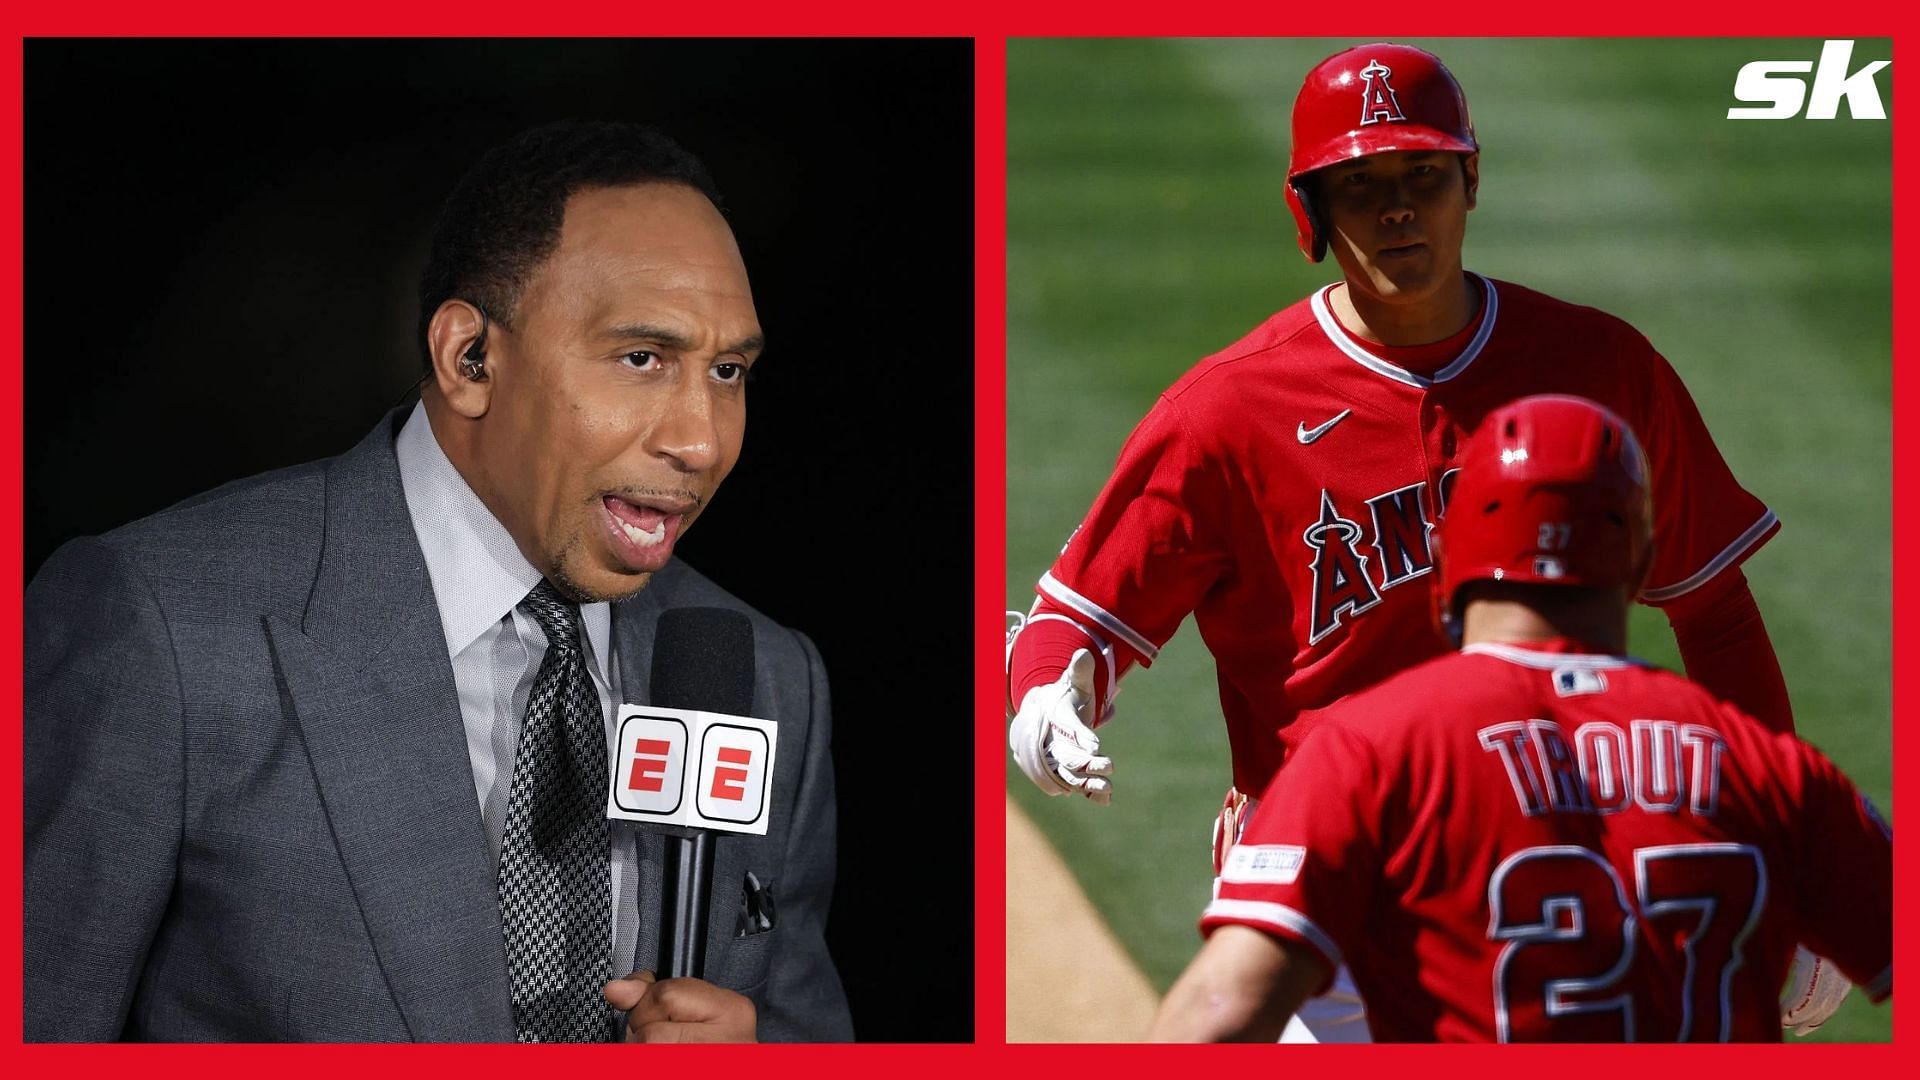 Stephen A. Smith &amp; Los Angeles Angels Superstars Mike Trout &amp; Shohei Ohtani